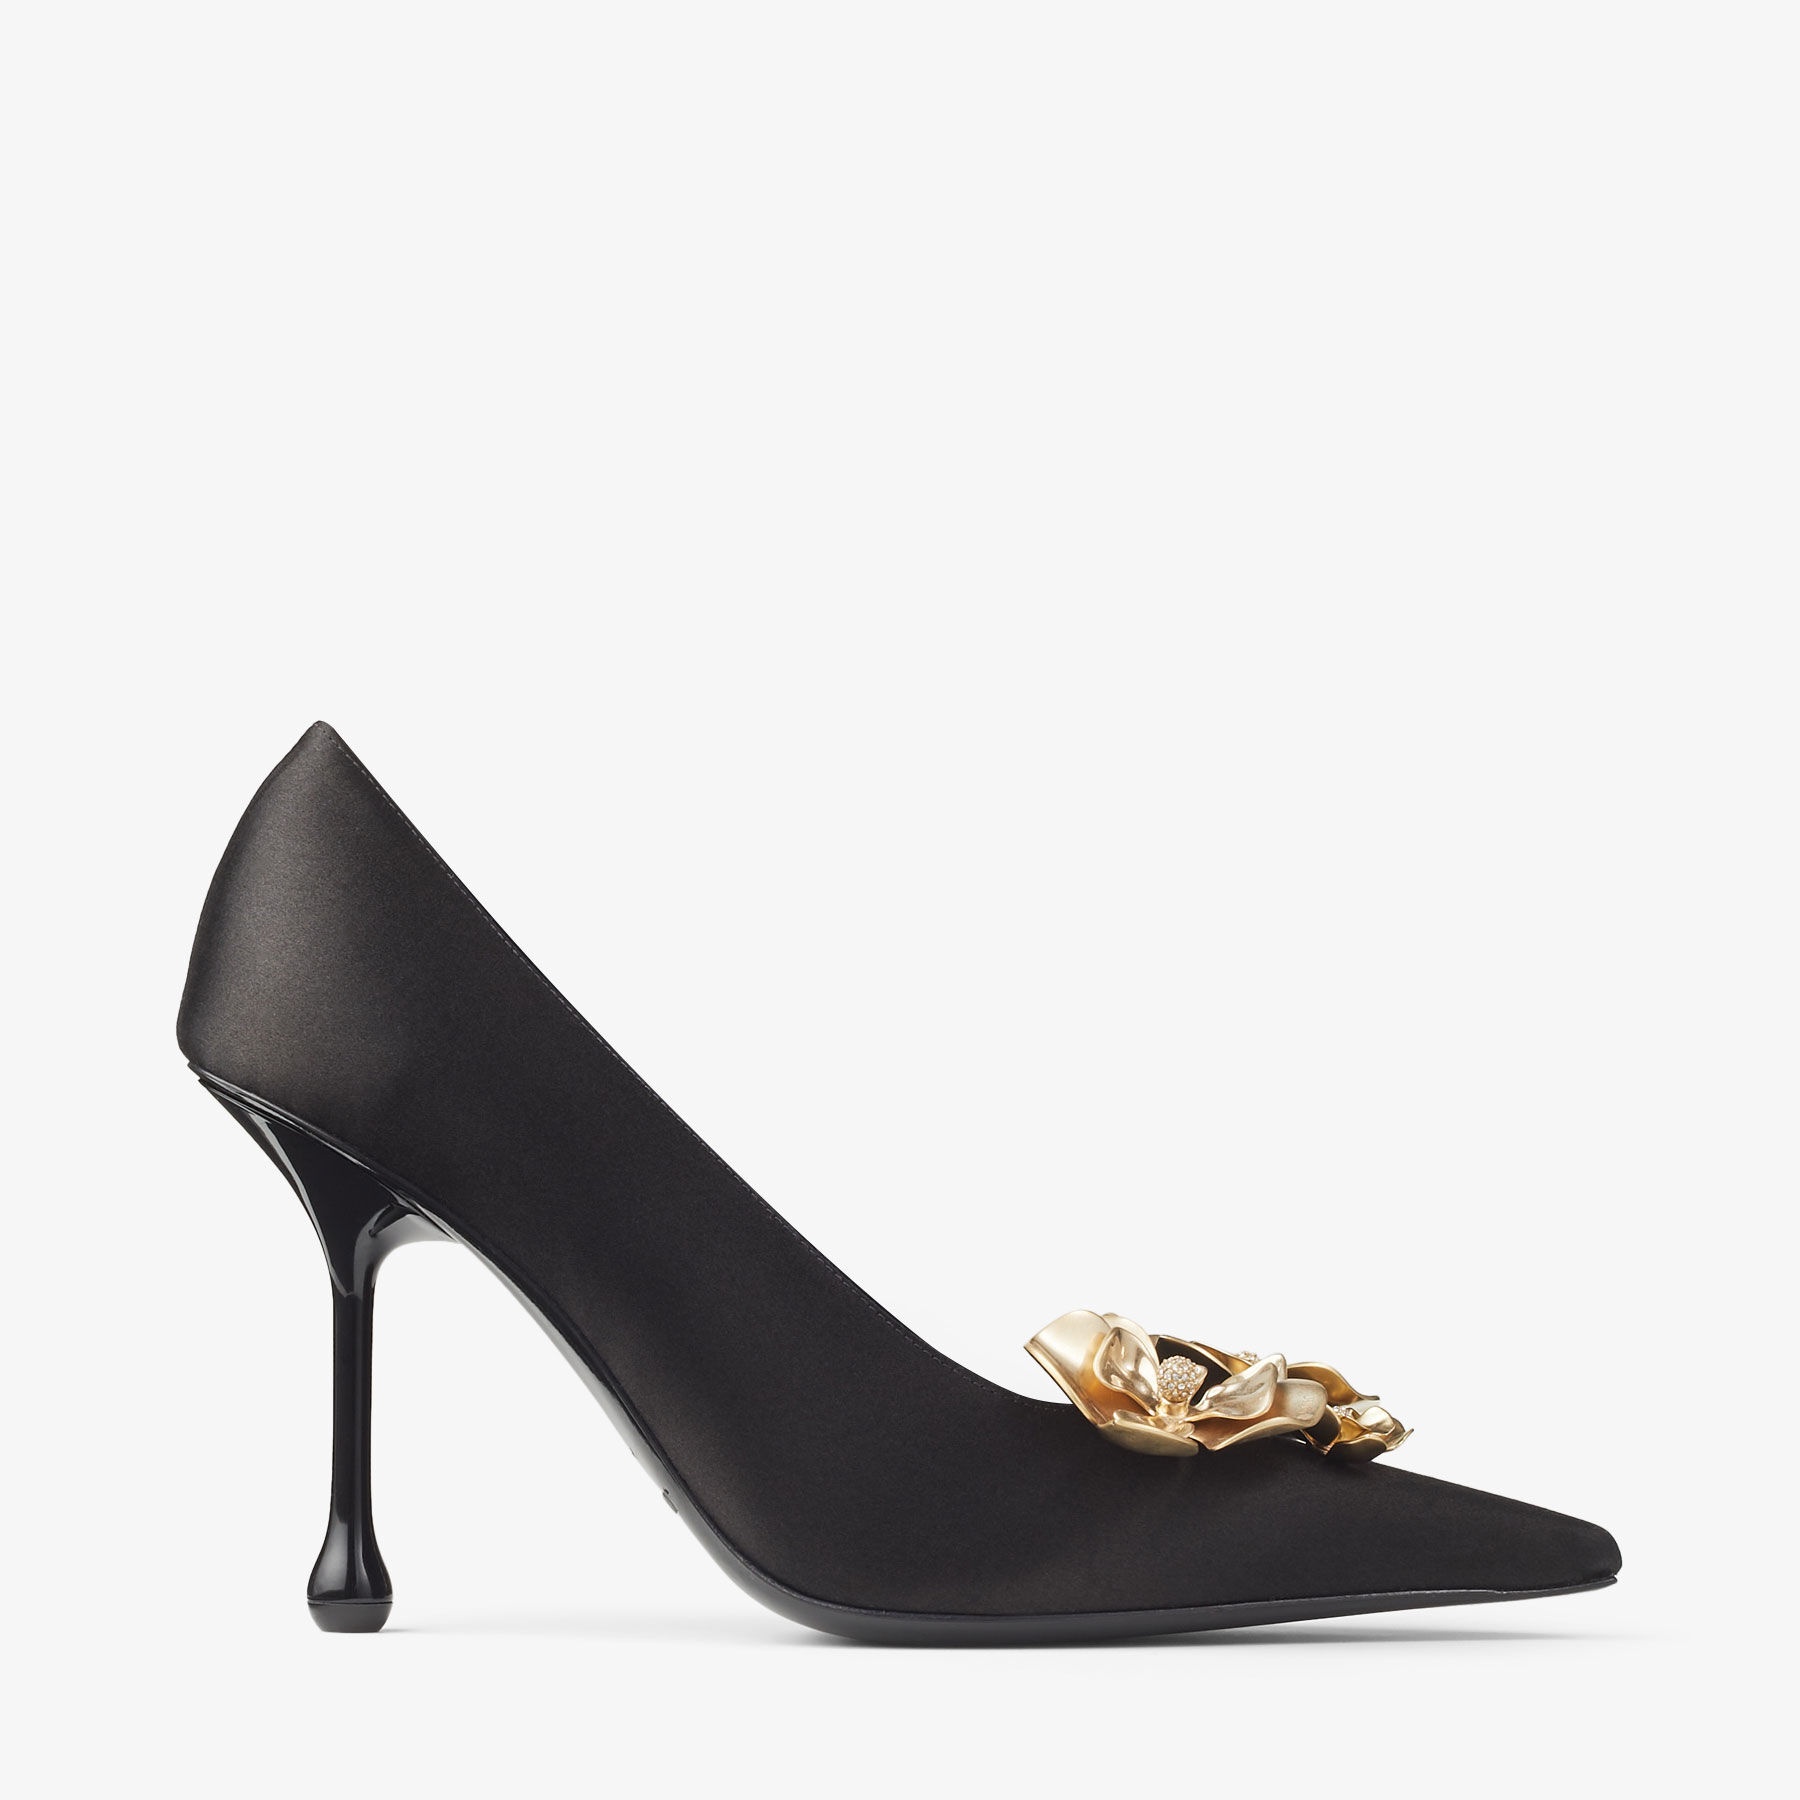 Ixia 95
Black Satin Pumps with Flowers - 1